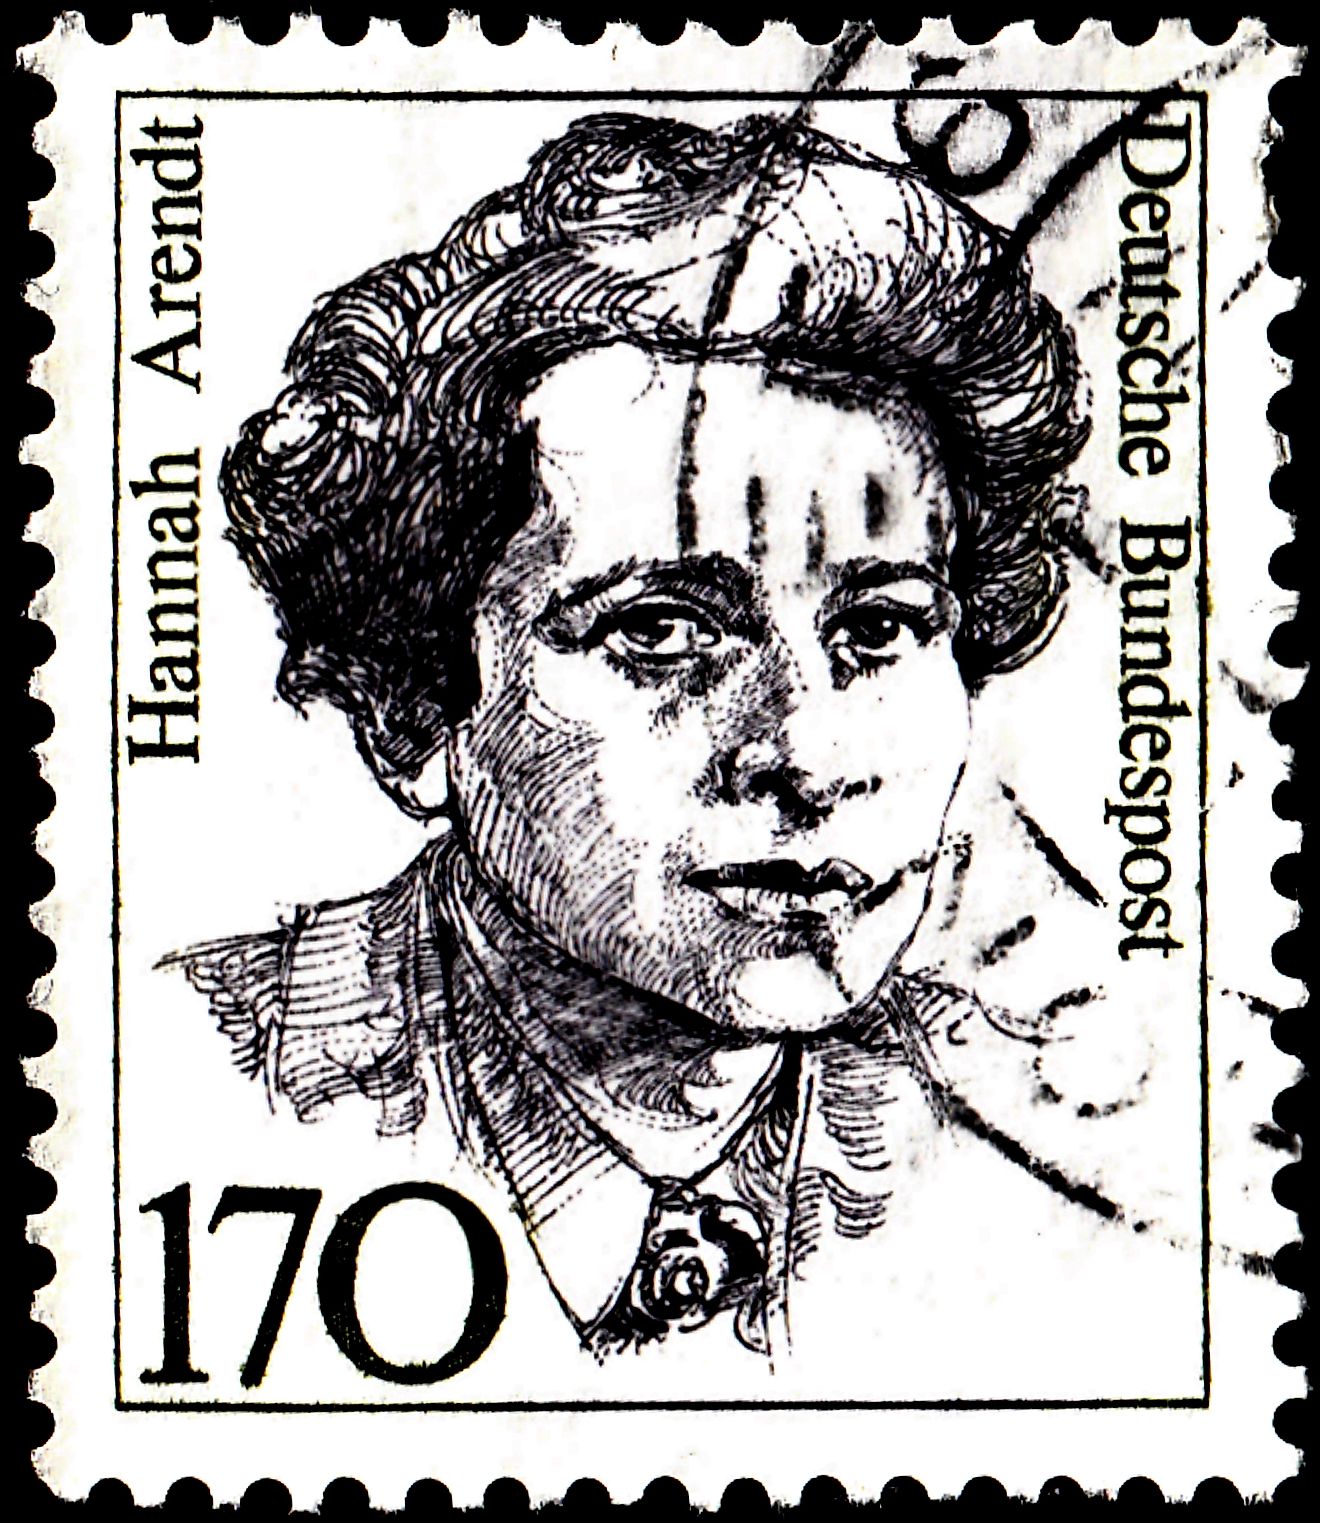 Postage stamp showing Hannah Arendt by A. Marino via Shutterstock.com